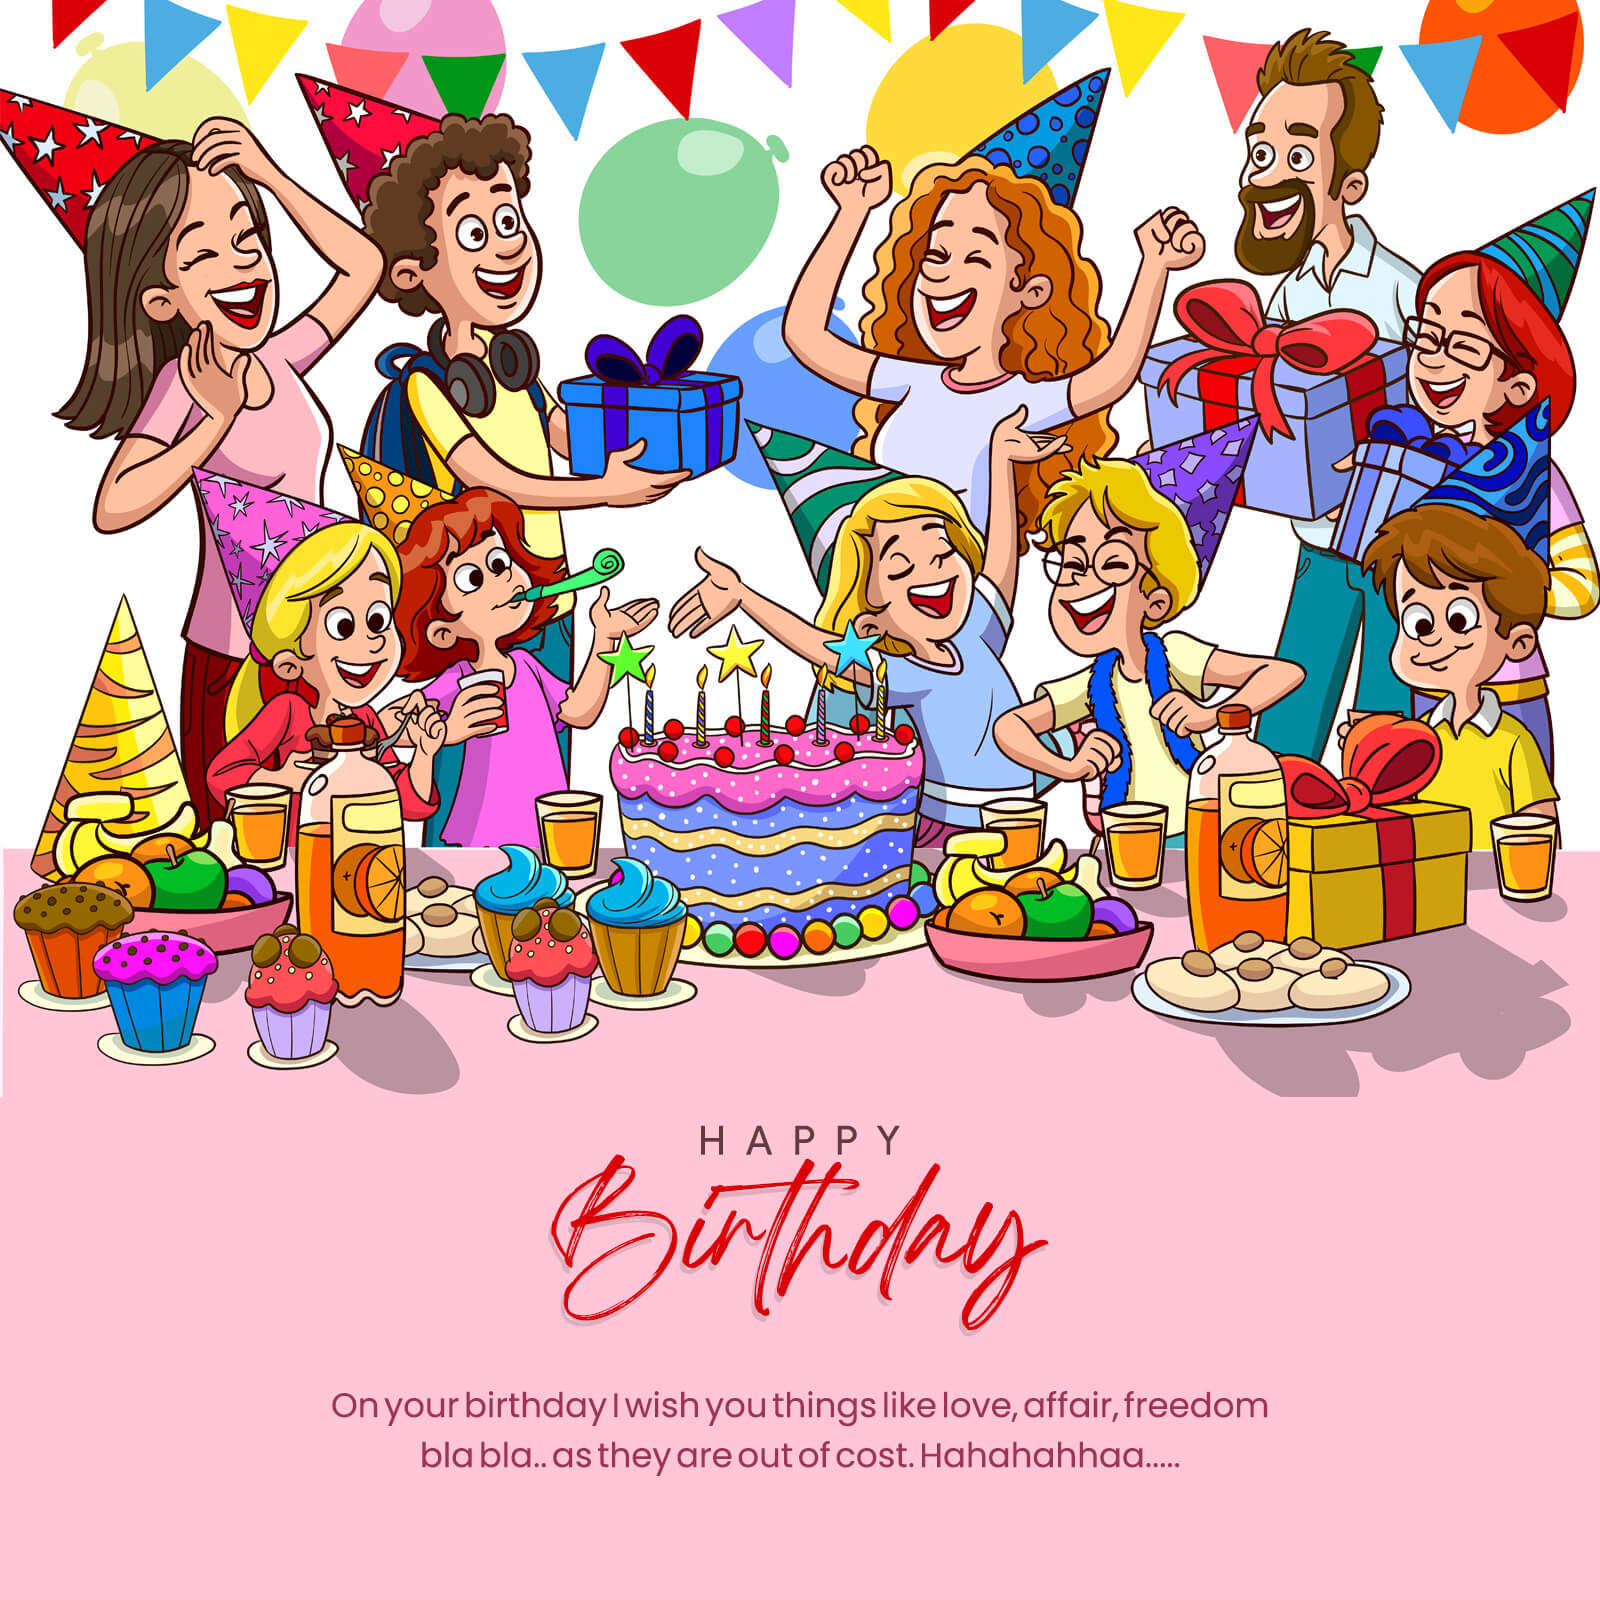 50-funny-happy-birthday-wishes-to-make-your-friend-laugh